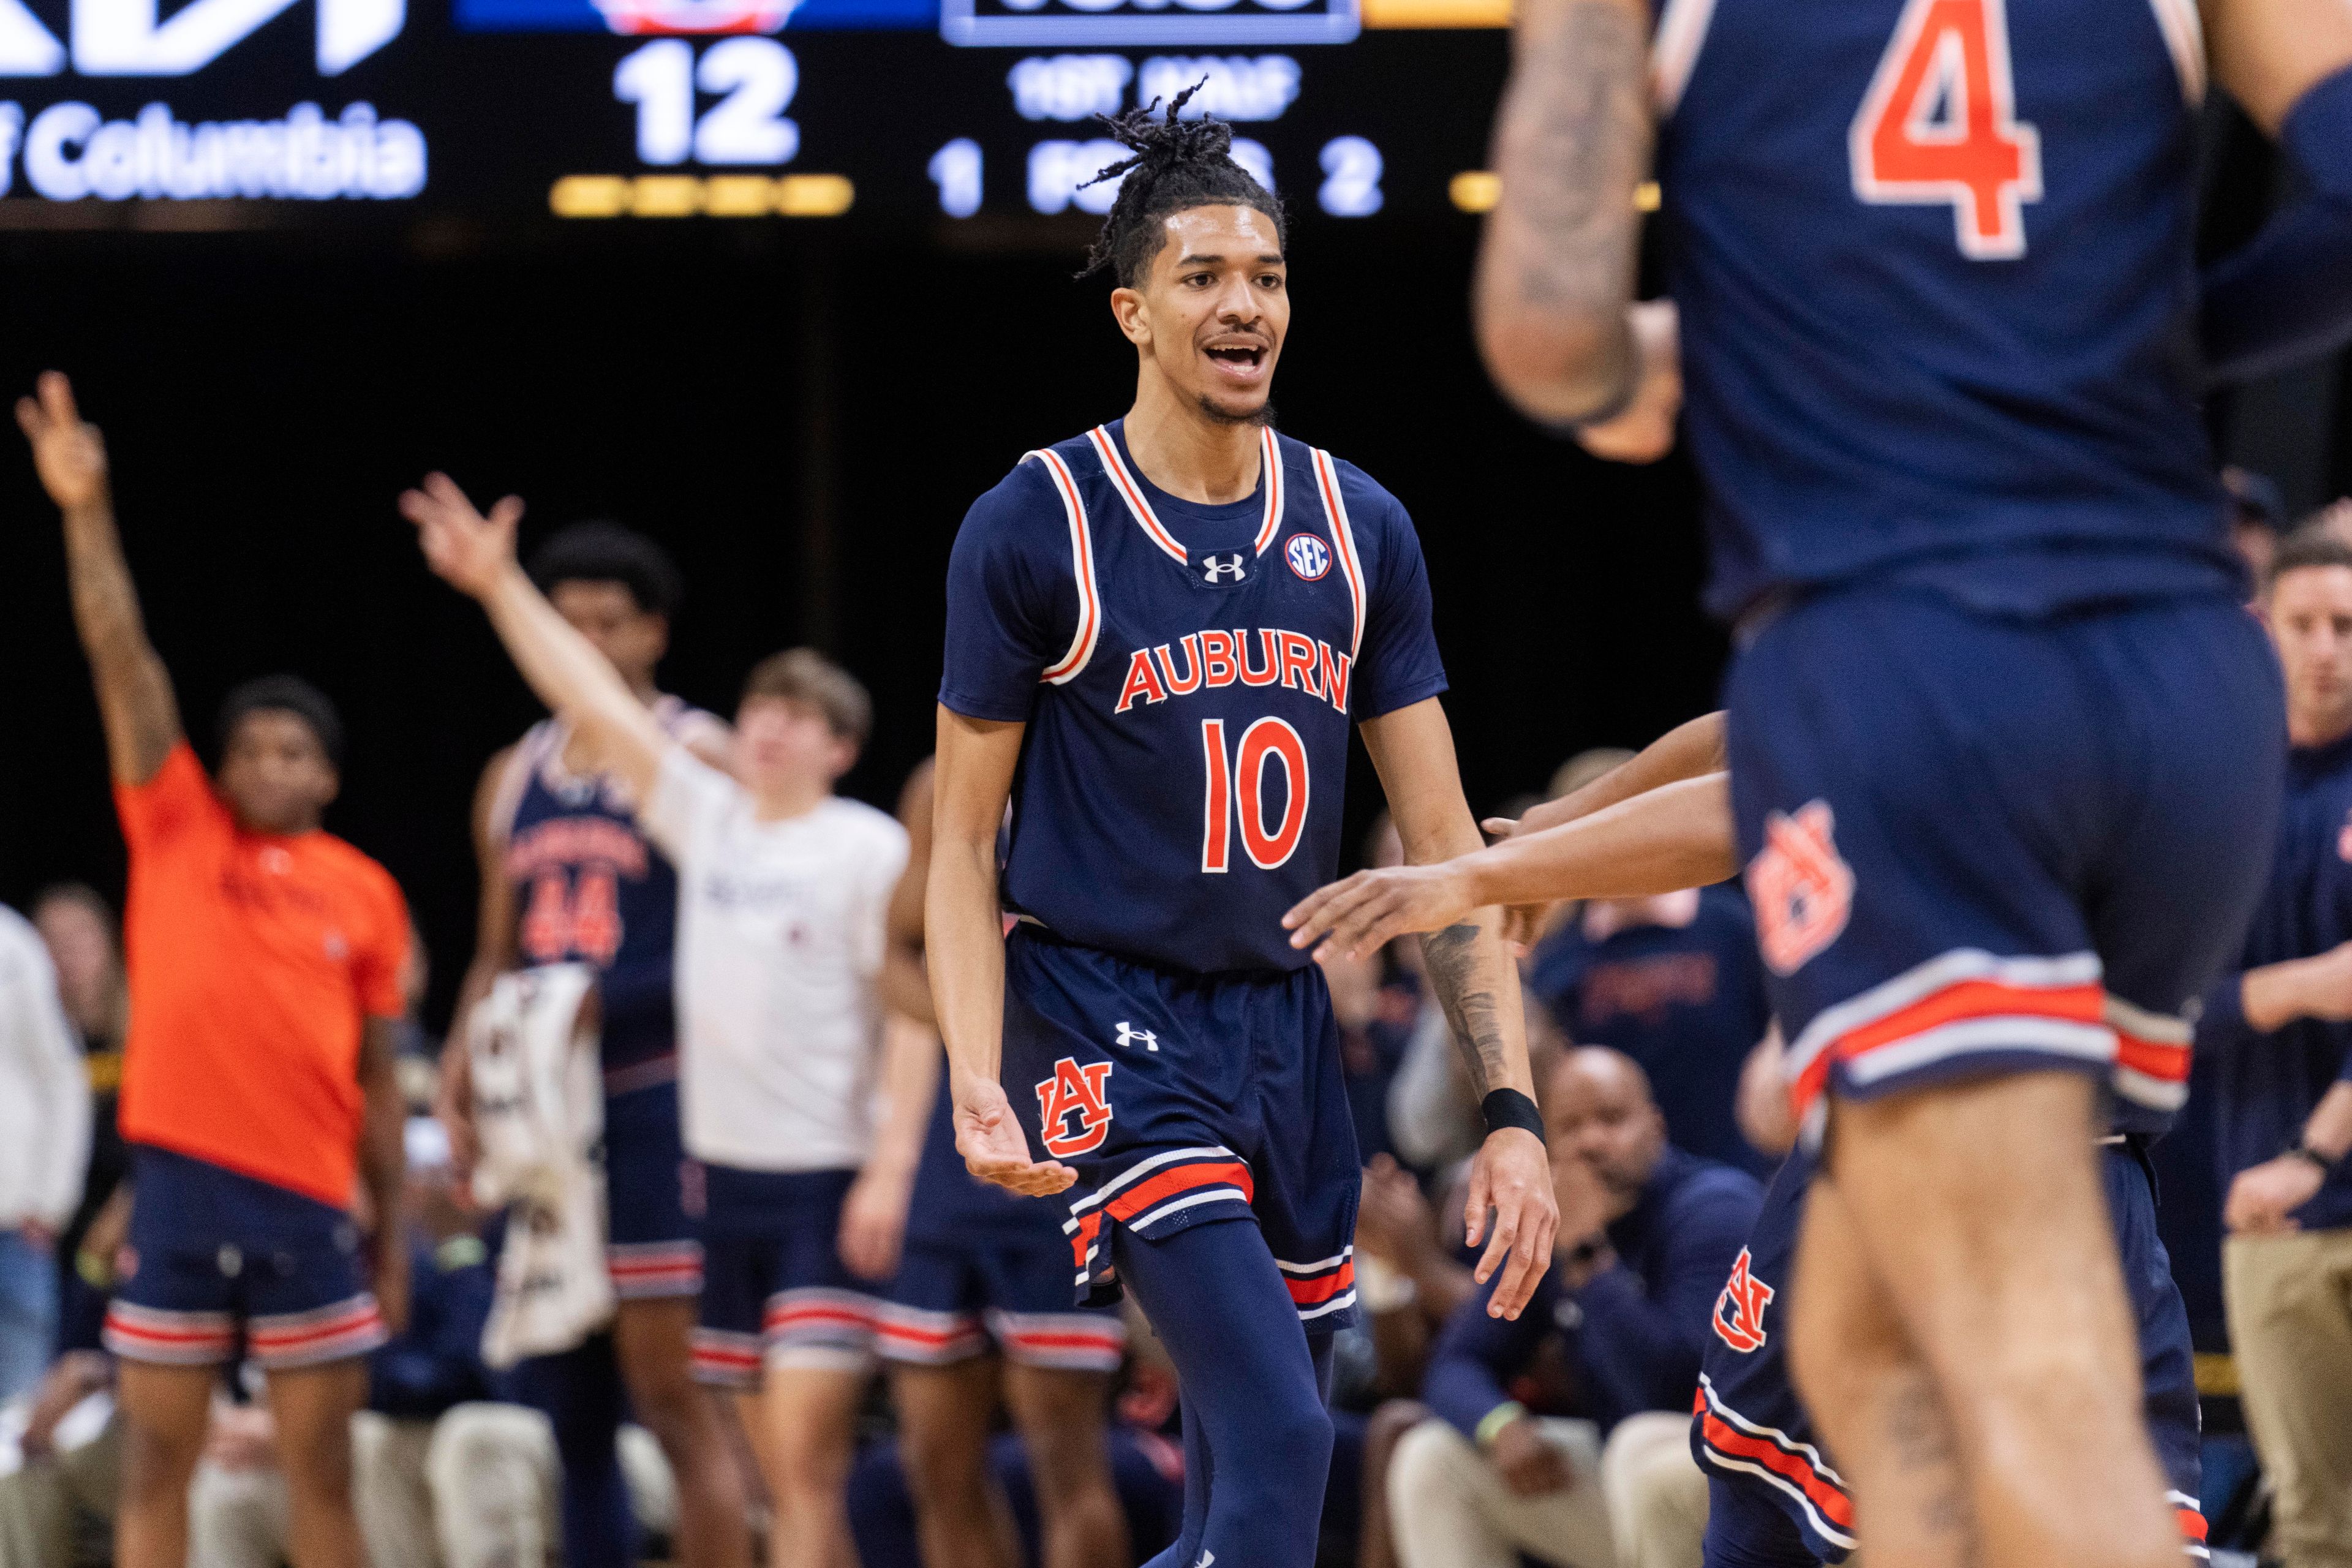 Auburn's Chad Baker-Mazara celebrates a basket against Missouri during the first half of an NCAA college basketball game Tuesday, March 5, 2024, in Columbia, Mo. (AP Photo/L.G. Patterson)